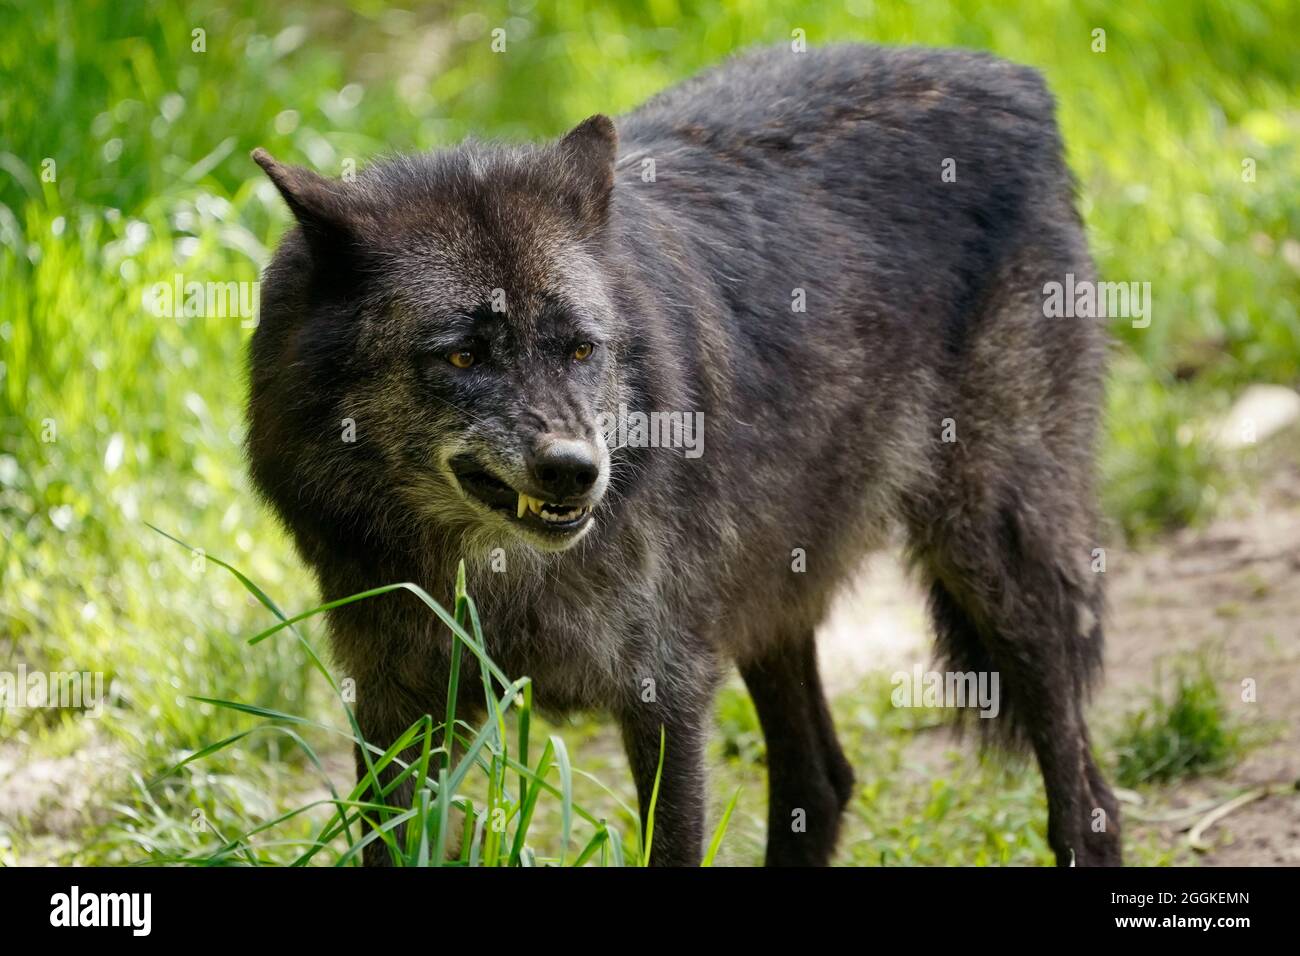 Timber wolf, American wolf (Canis lupus occidentalis) animal portrait, Germany Stock Photo